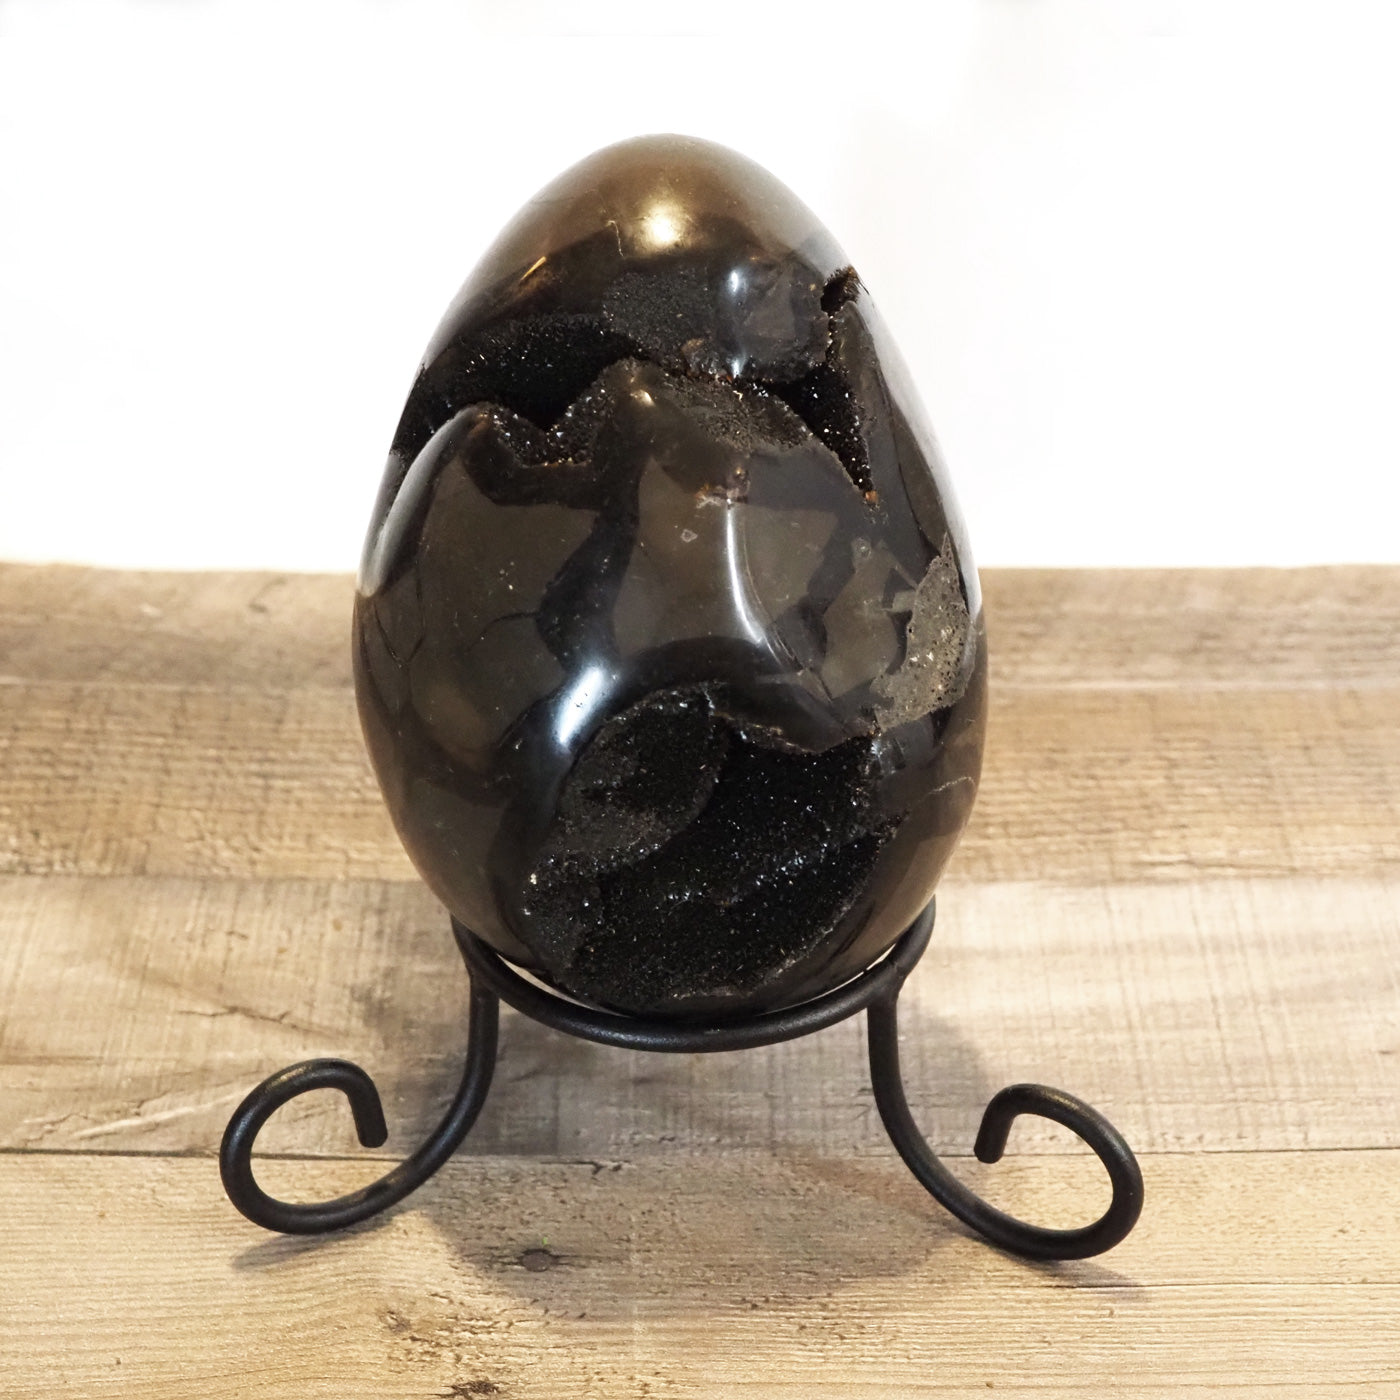 6" tall x 4.5" wide Septarian Dragon Egg sitting on included wrought iron stand